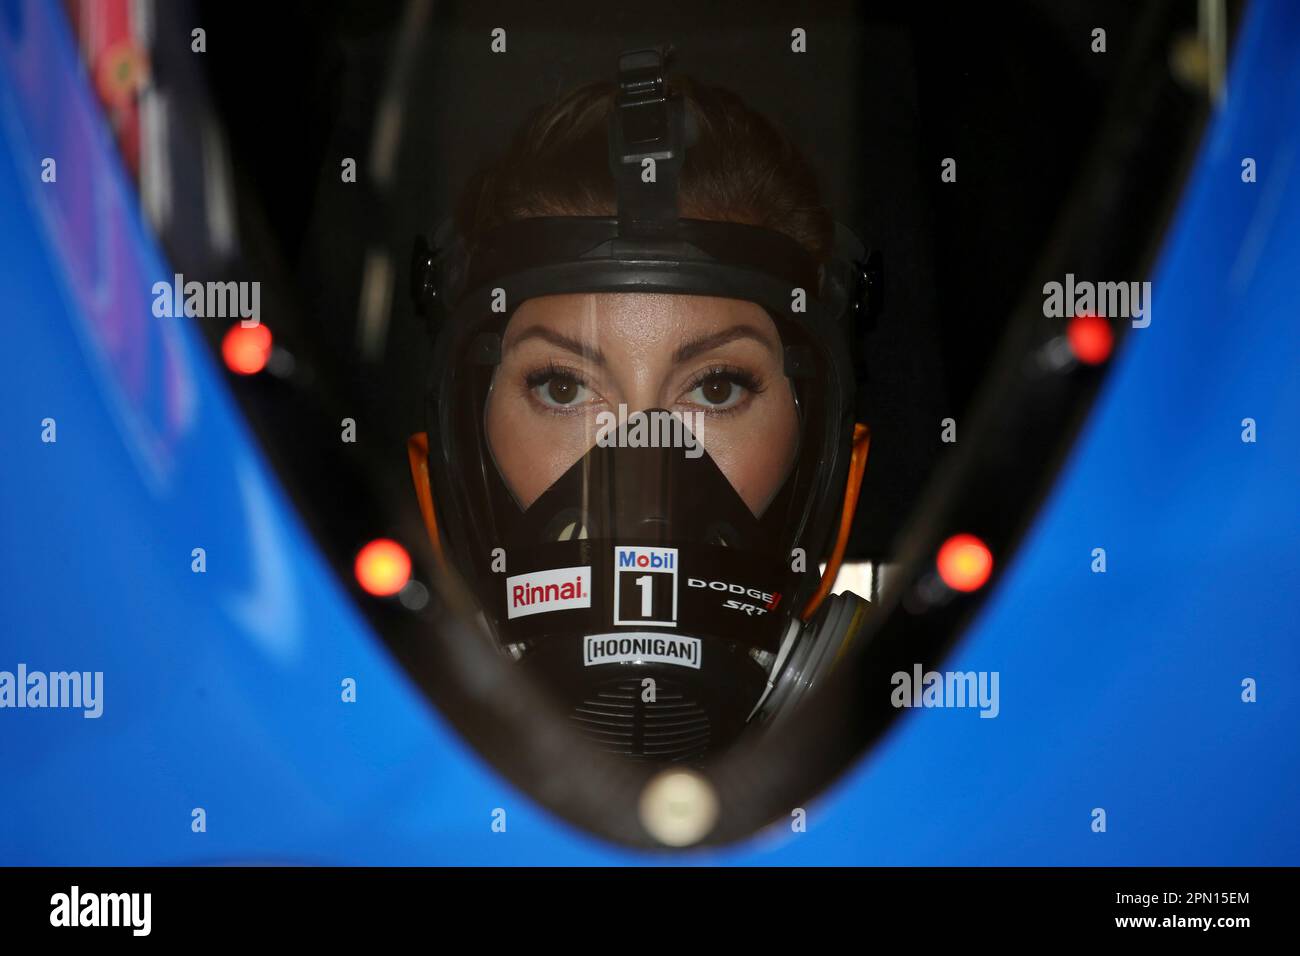 LAS VEGAS, NV - APRIL 15: Leah Pruett (777 TF) Dodge Power Brokers NHRA Top  Fuel Dragster prepares her car prior to the star of the NHRA Four-Wide  Nationals Camping World Drag